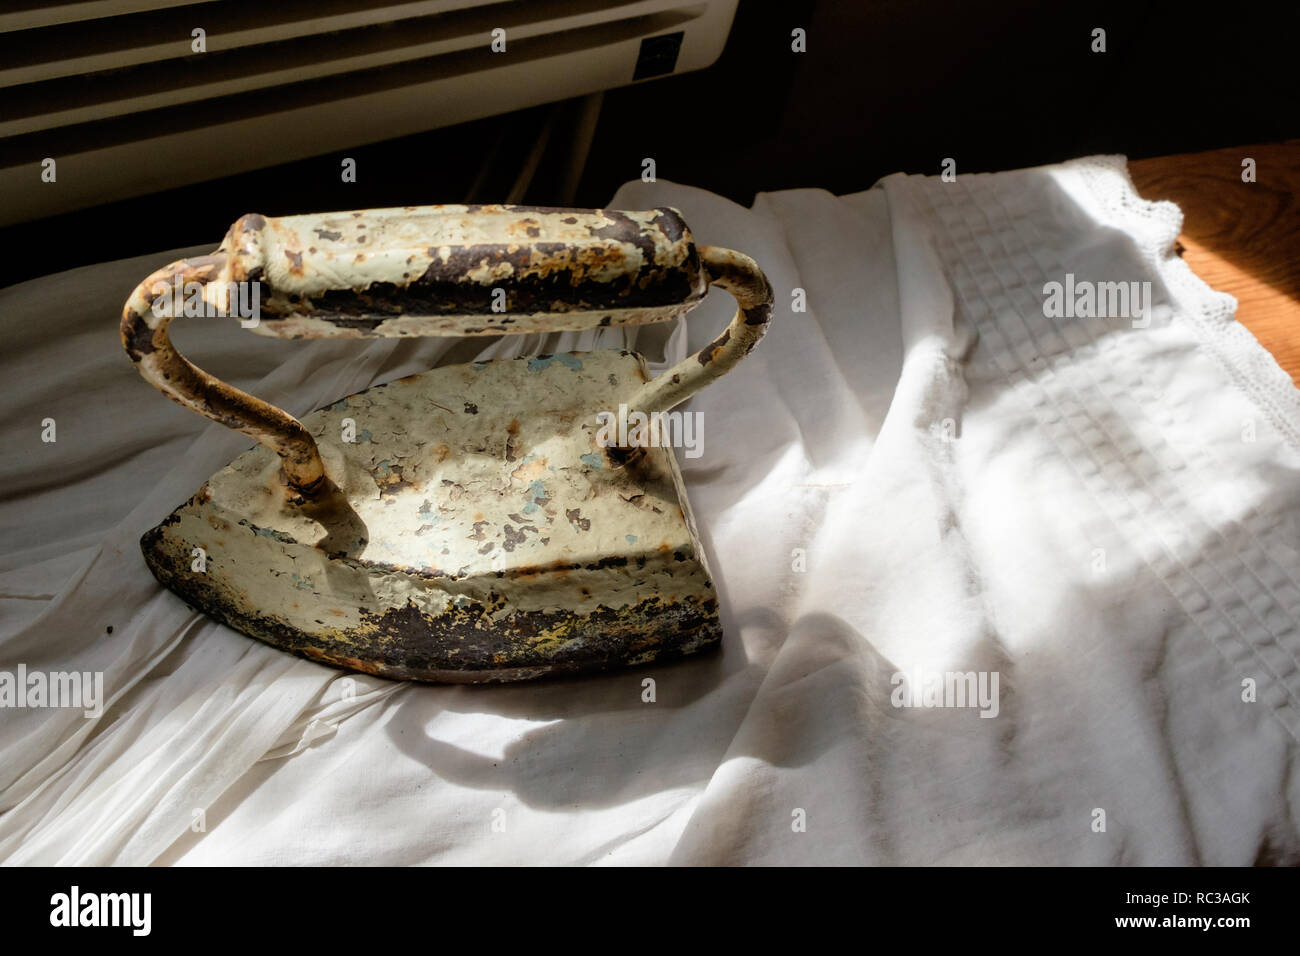 Antique rusted, worn and peeling stone clothes iron on white fabric. Stock Photo